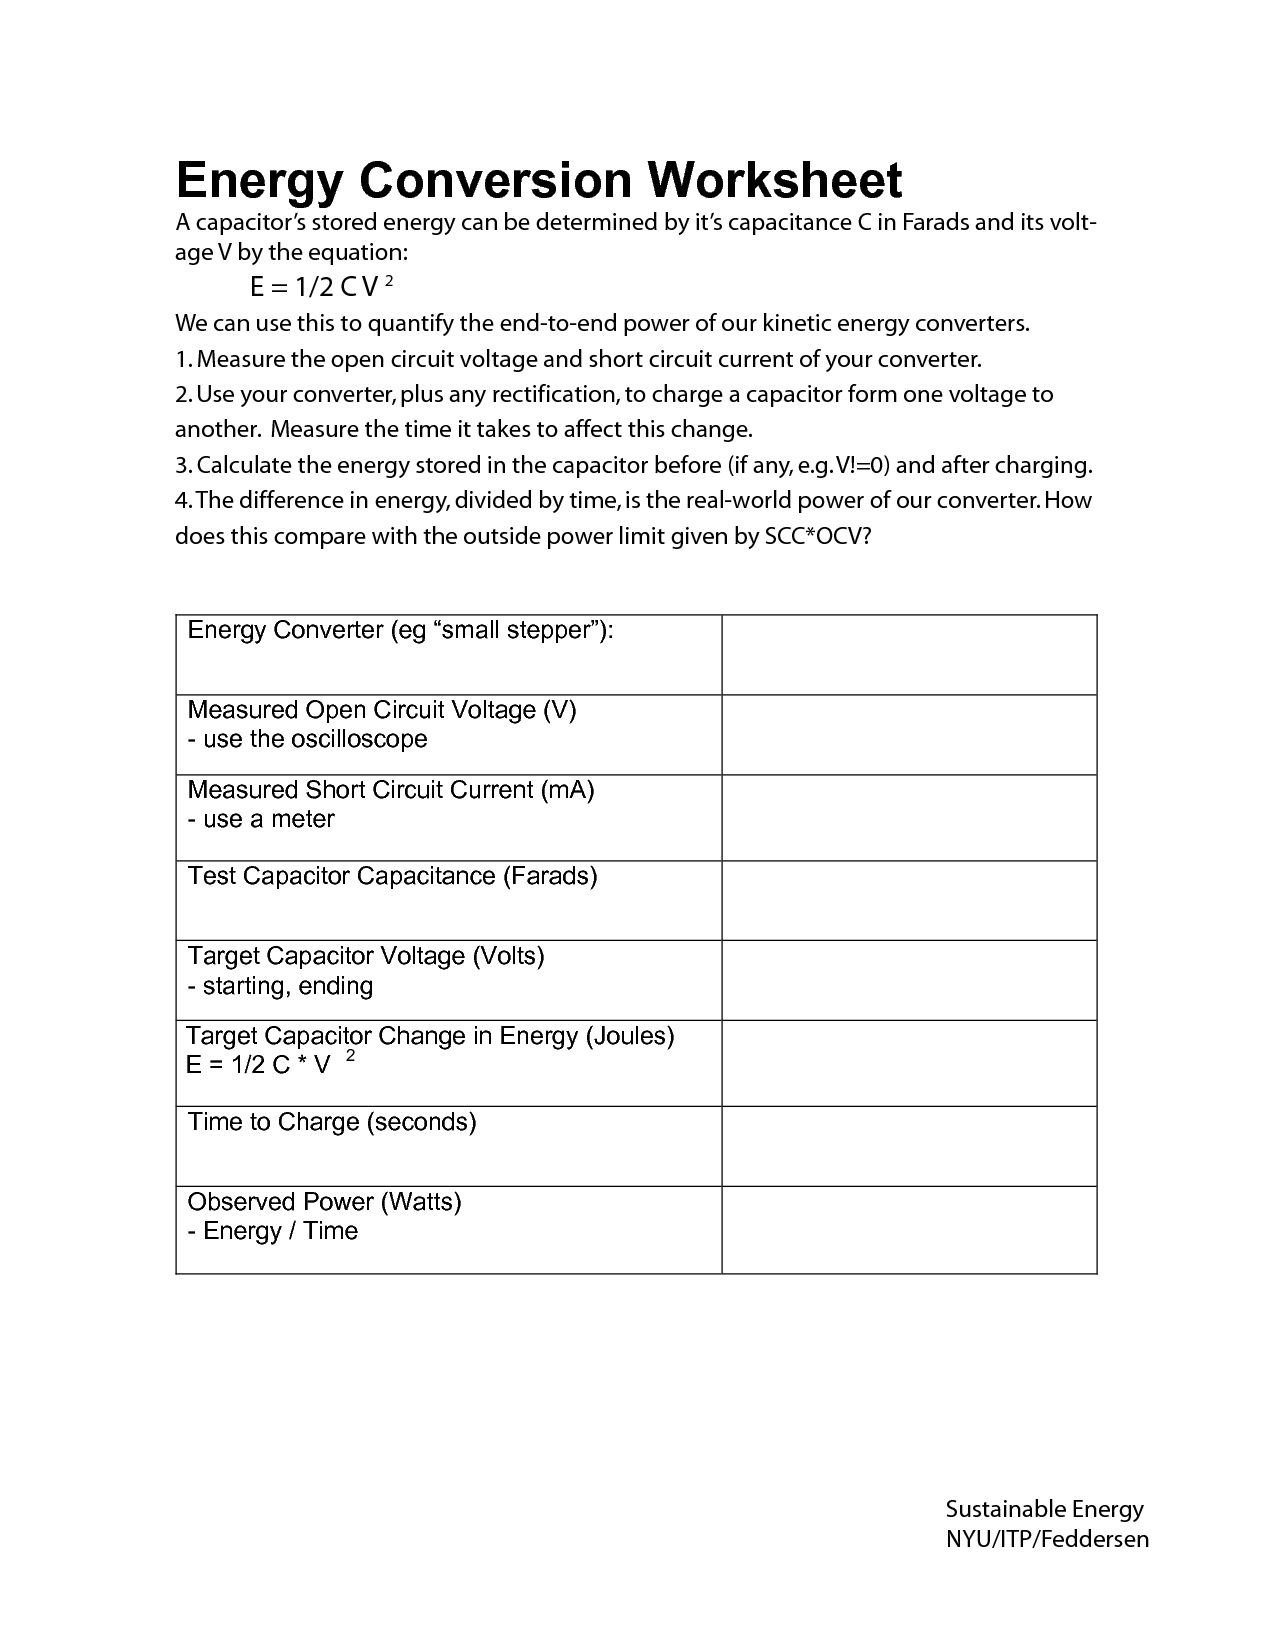 16-best-images-of-energy-conversions-worksheet-forms-of-energy